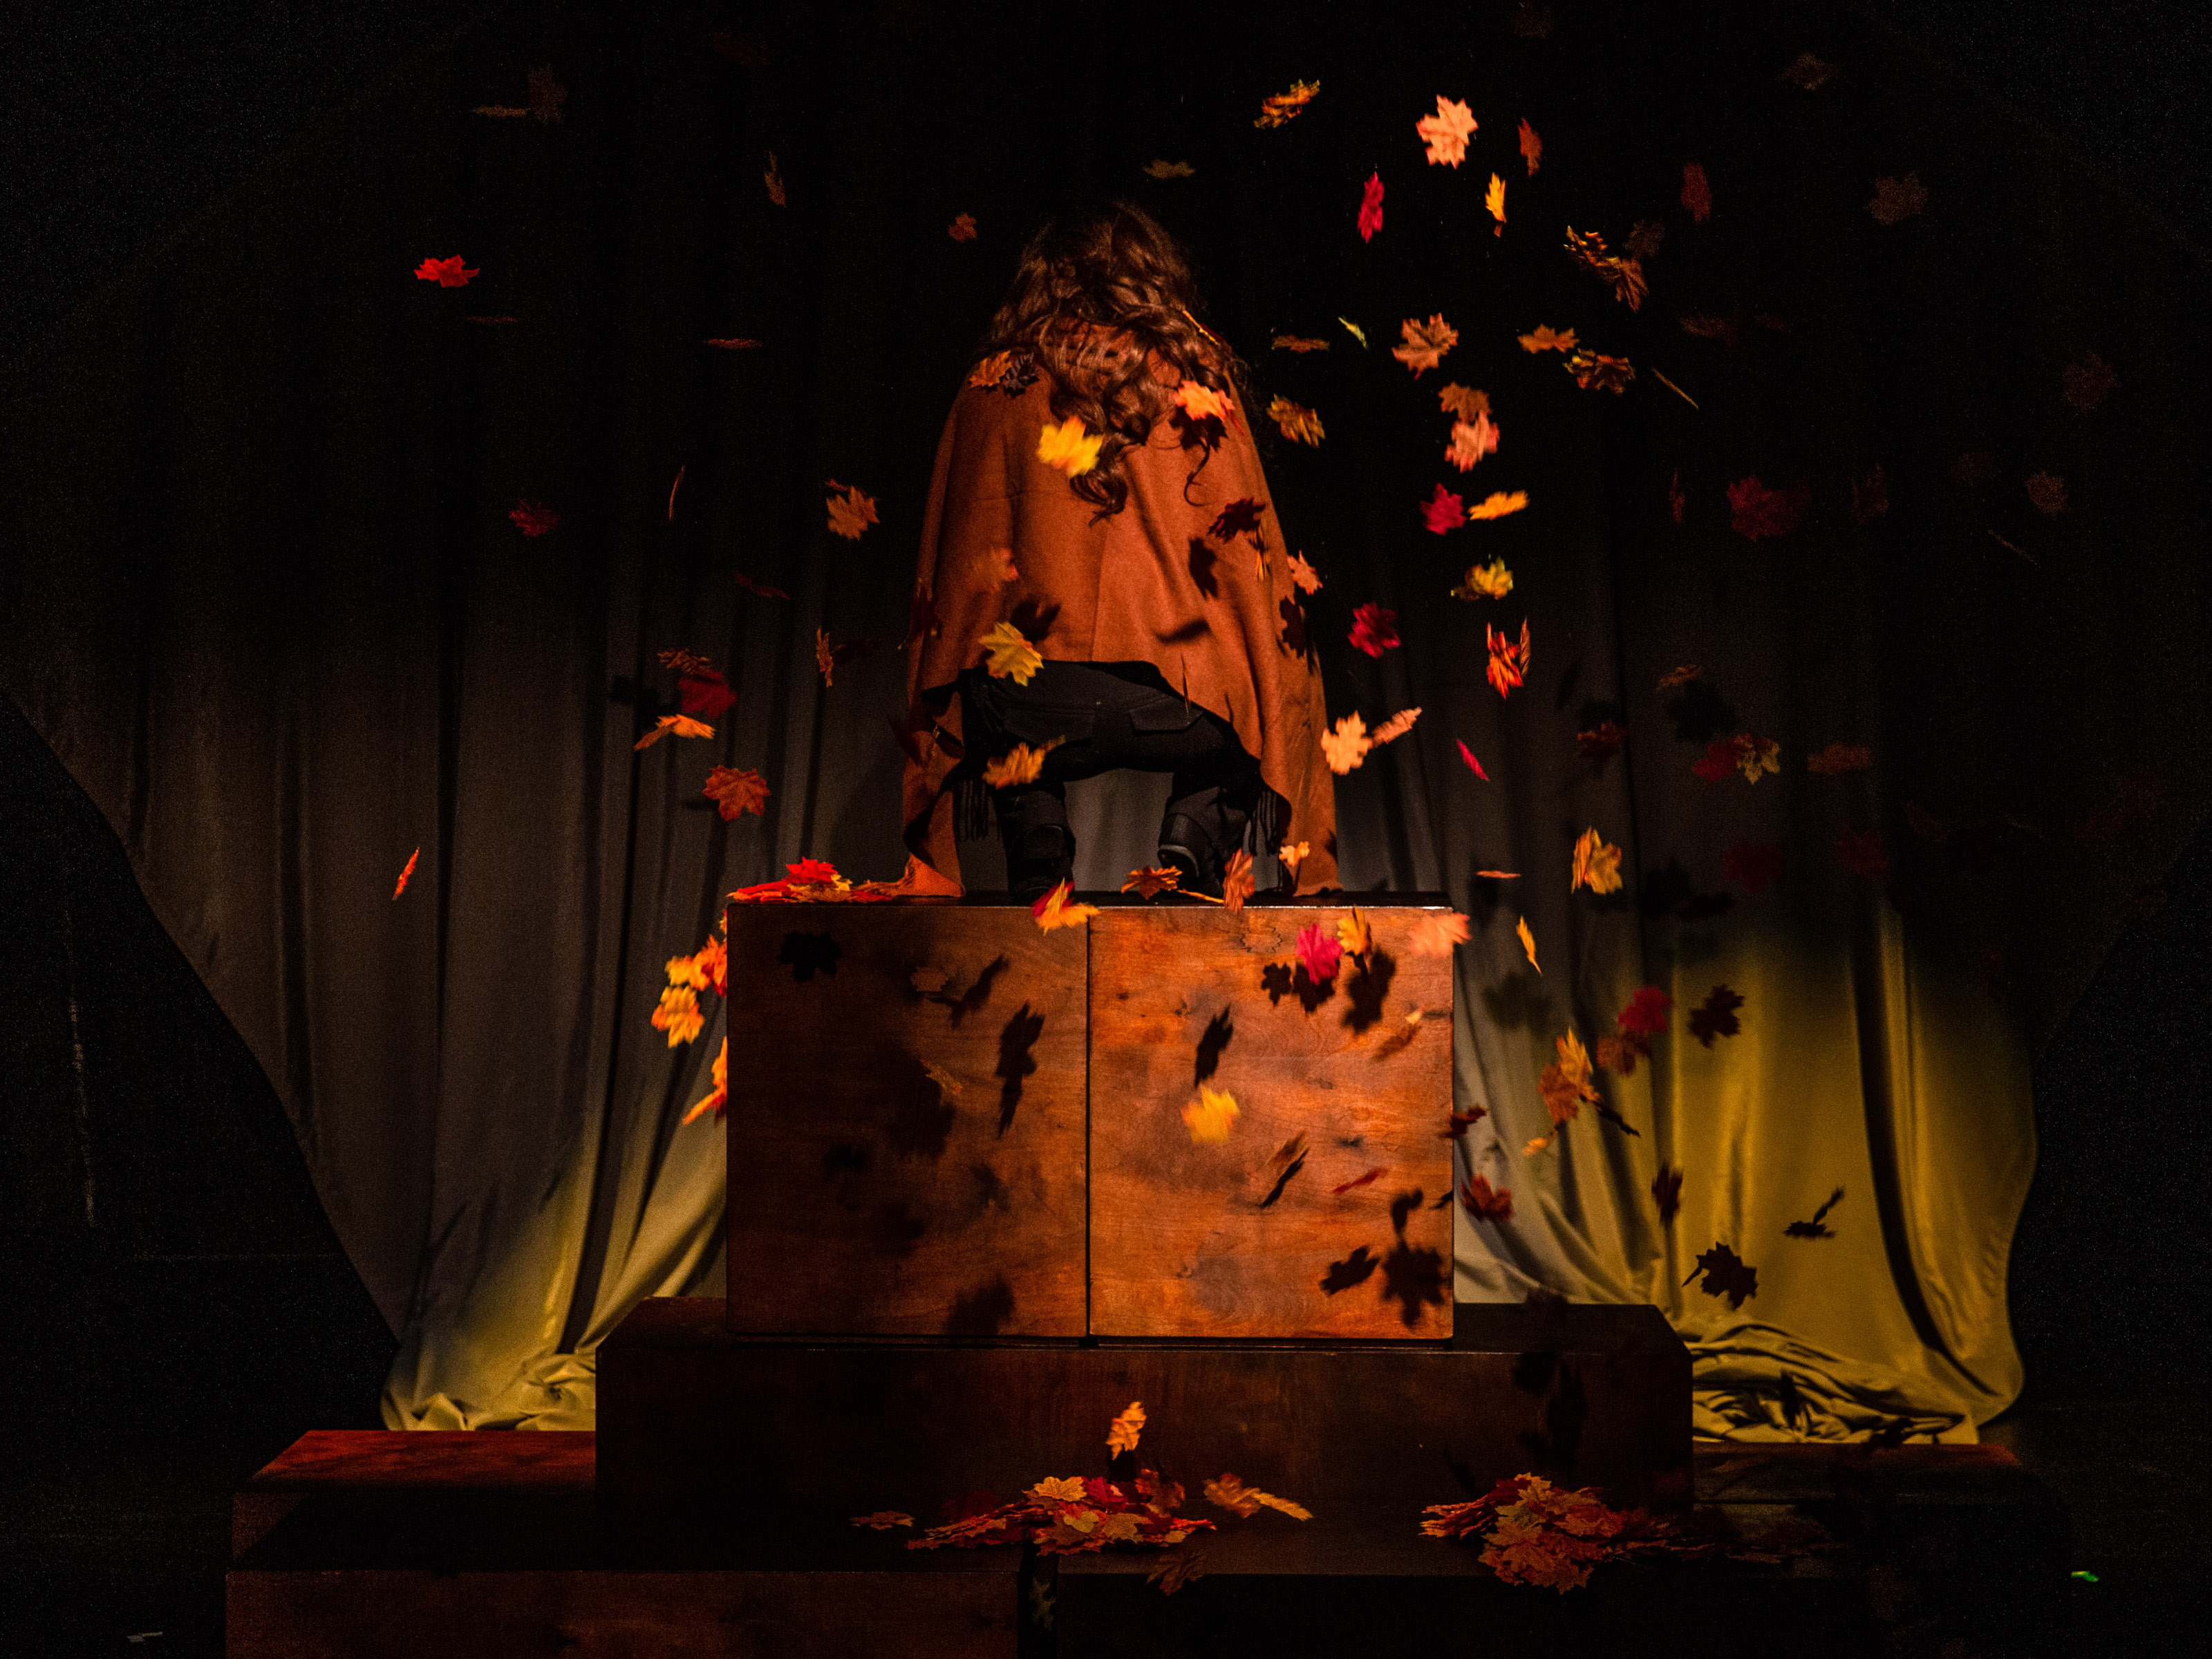 Helga's puppet has its back turned to the audience and kneels on a large wooden block. Autumn leaves rain down on her from the ceiling. She wears a brown cape in the same color as the leaves.